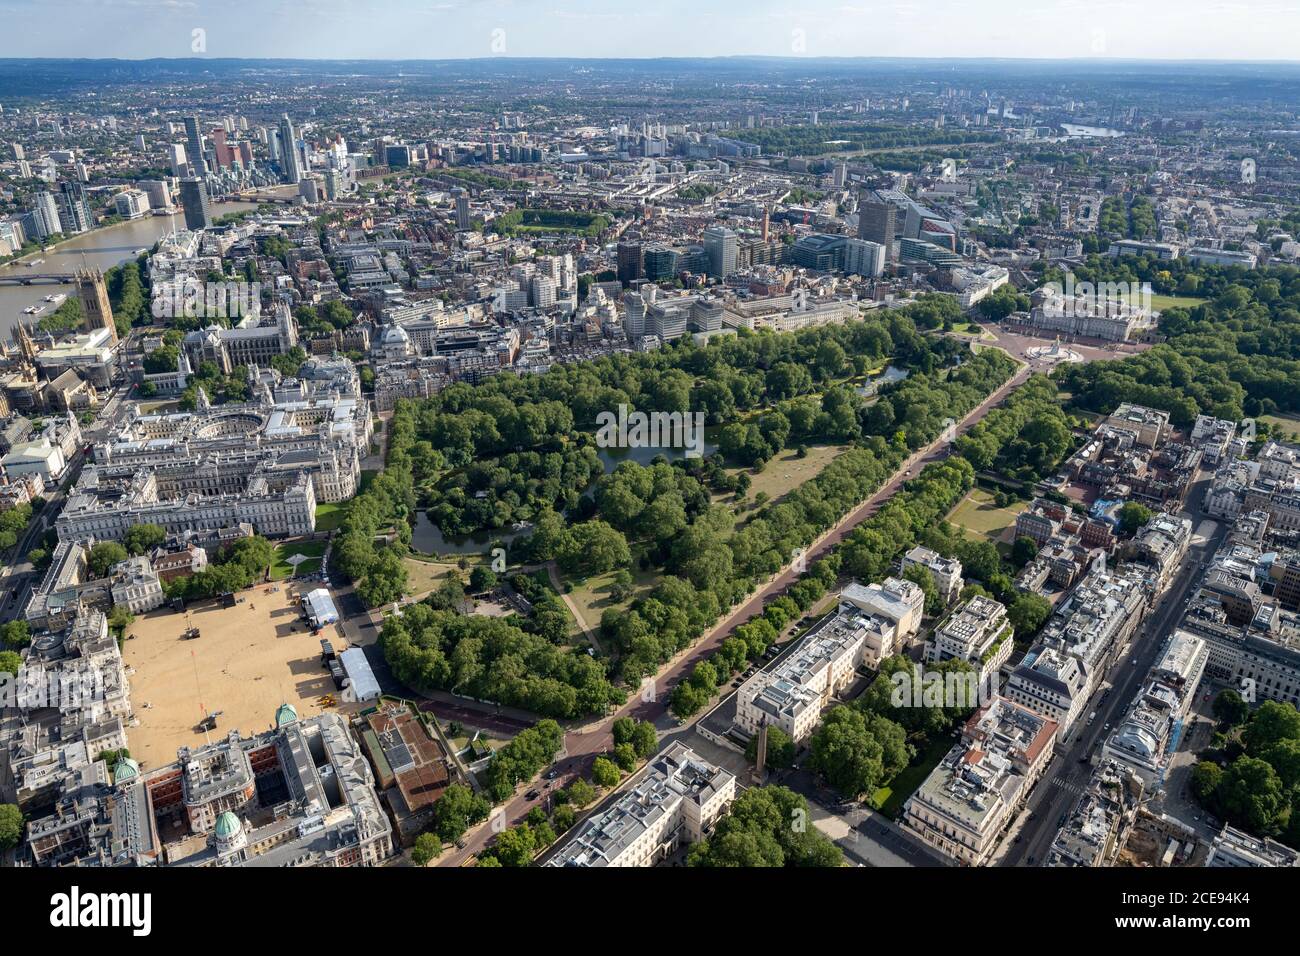 Aerial view of London featuring St James's Park and Buckingham Palace. Stock Photo